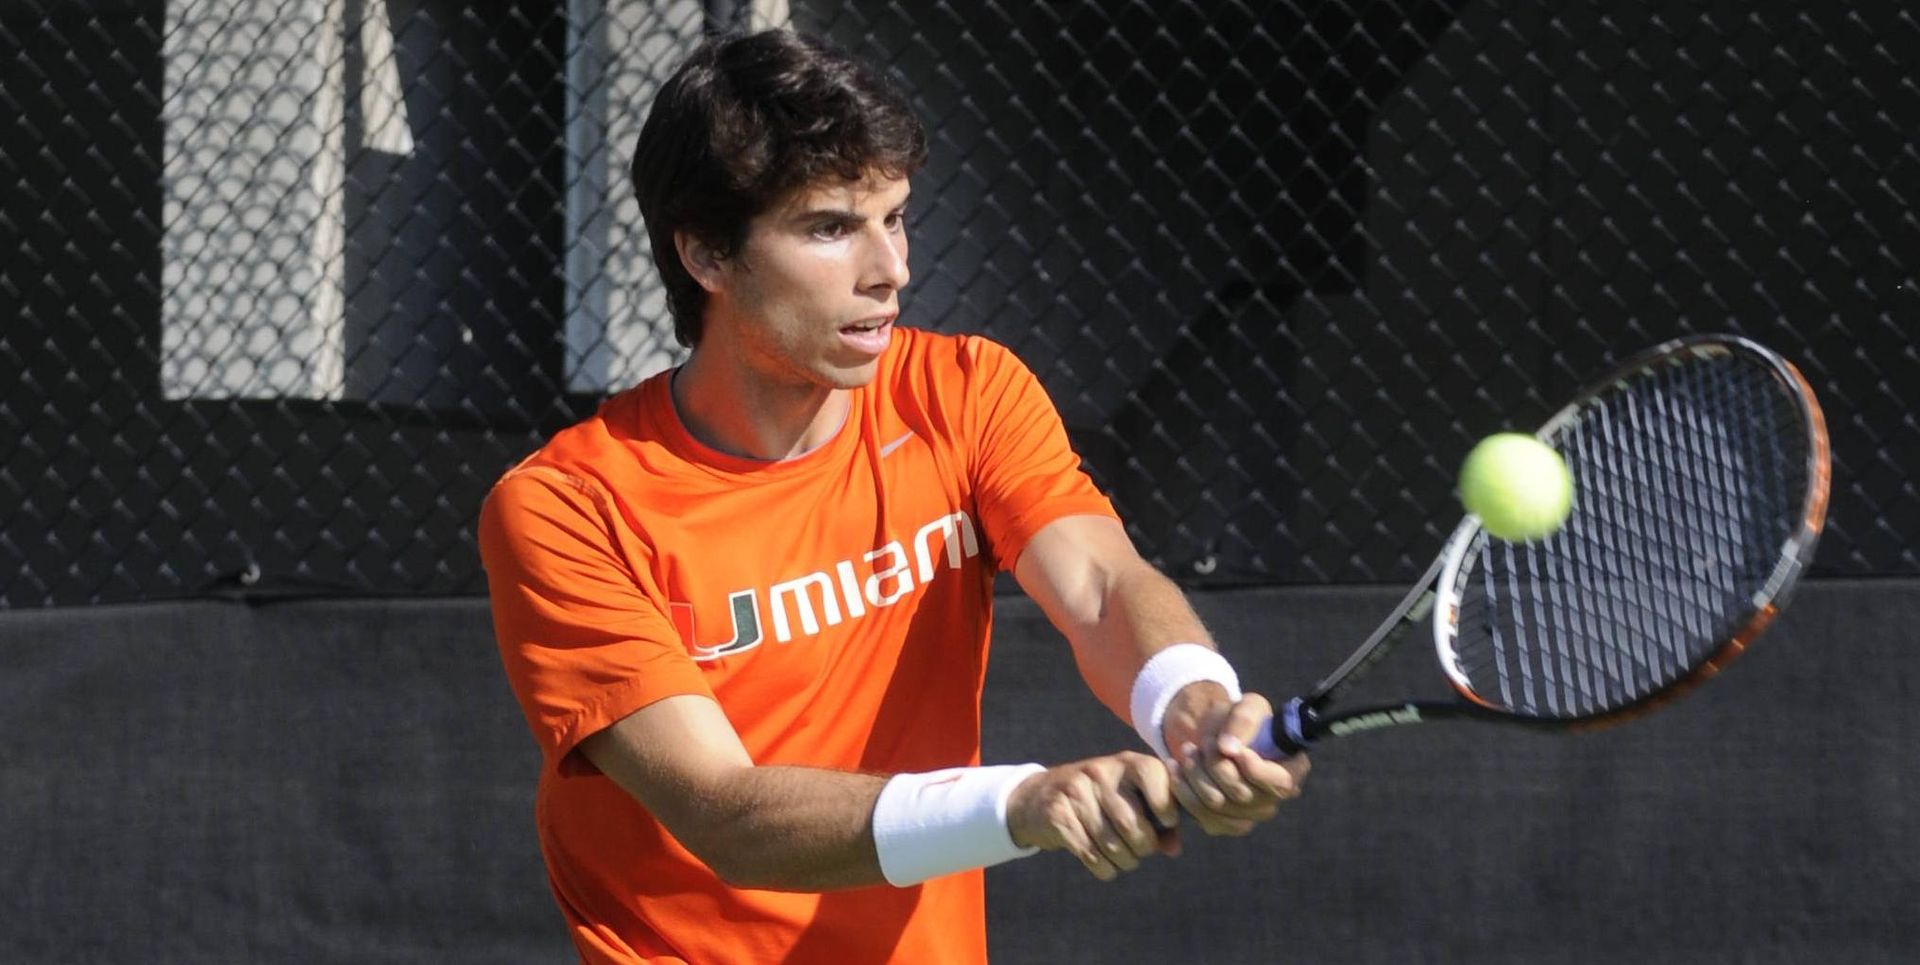 MTennis Downs Georgia State, 6-1 - University of Miami Hurricanes Official Athletic Site